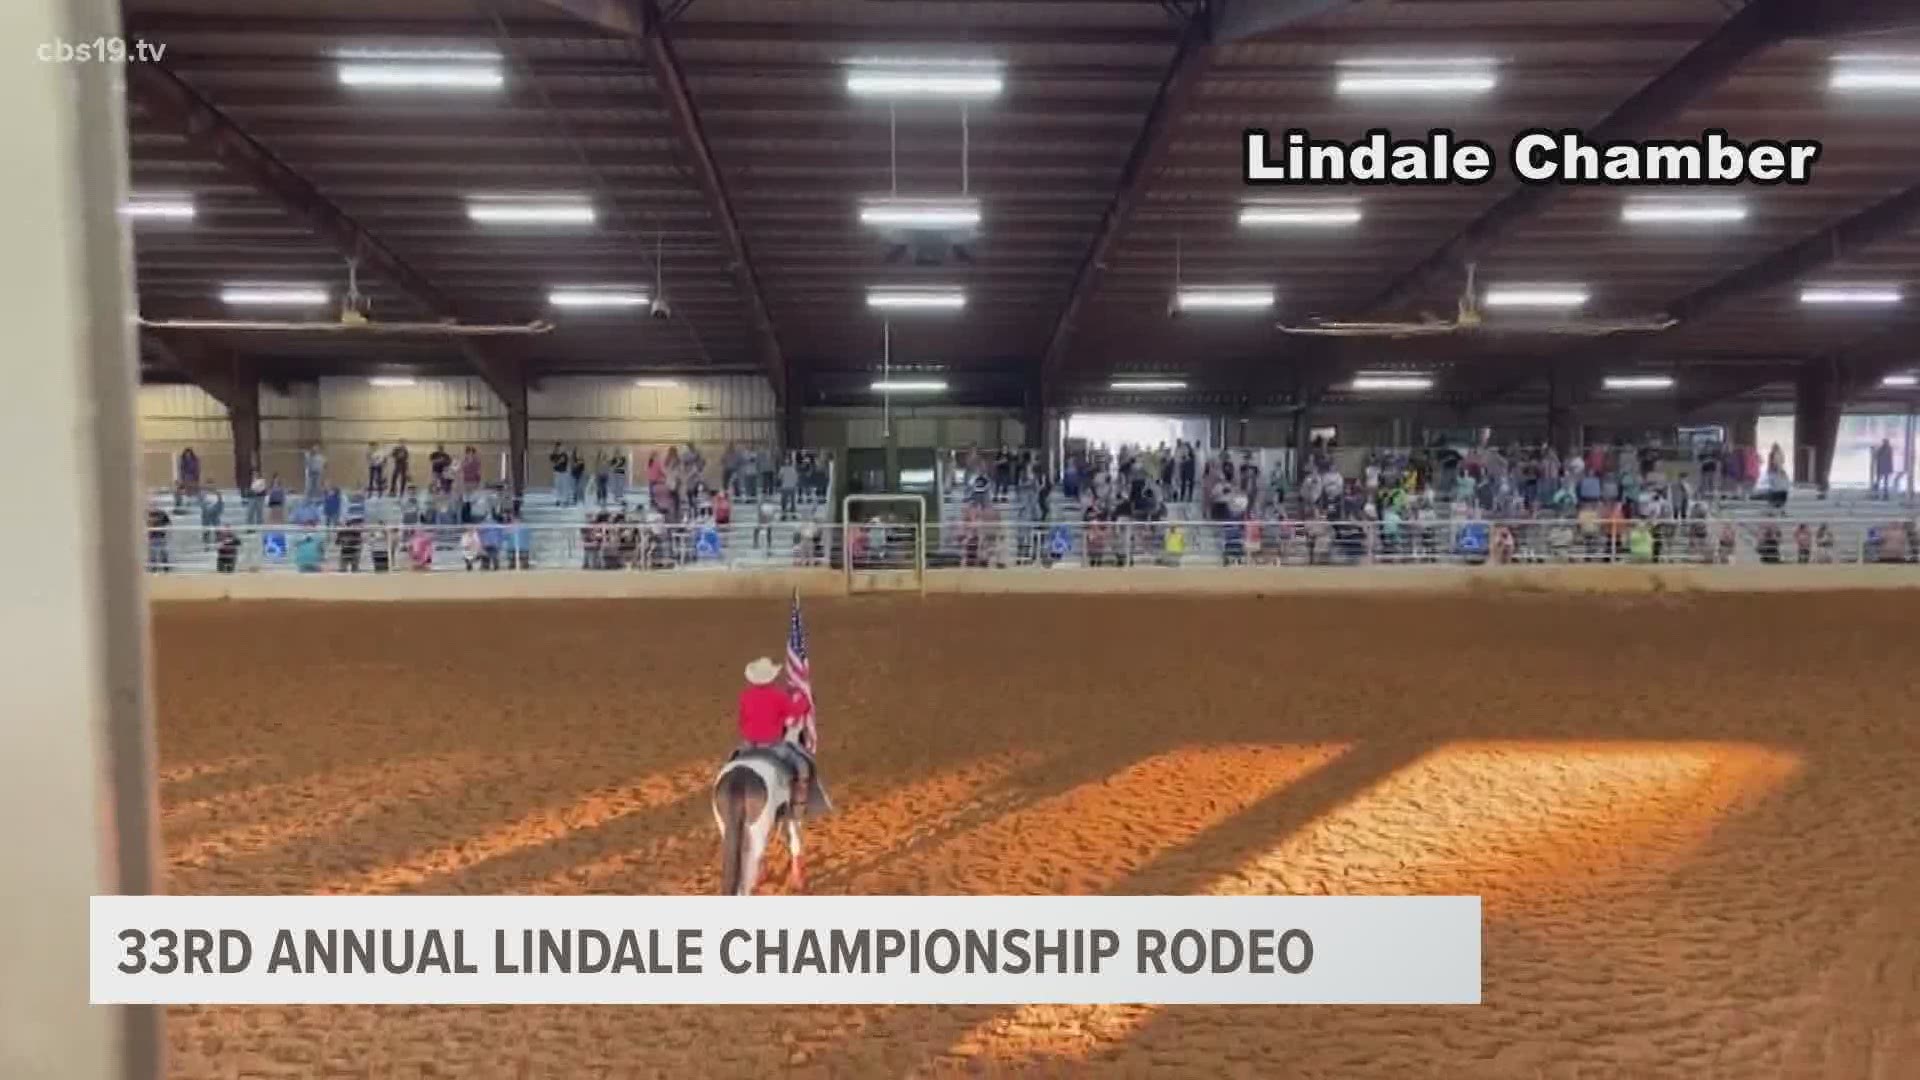 THE RODEO WILL BE GOING ON TONIGHT AND SATURDAY NIGHT.